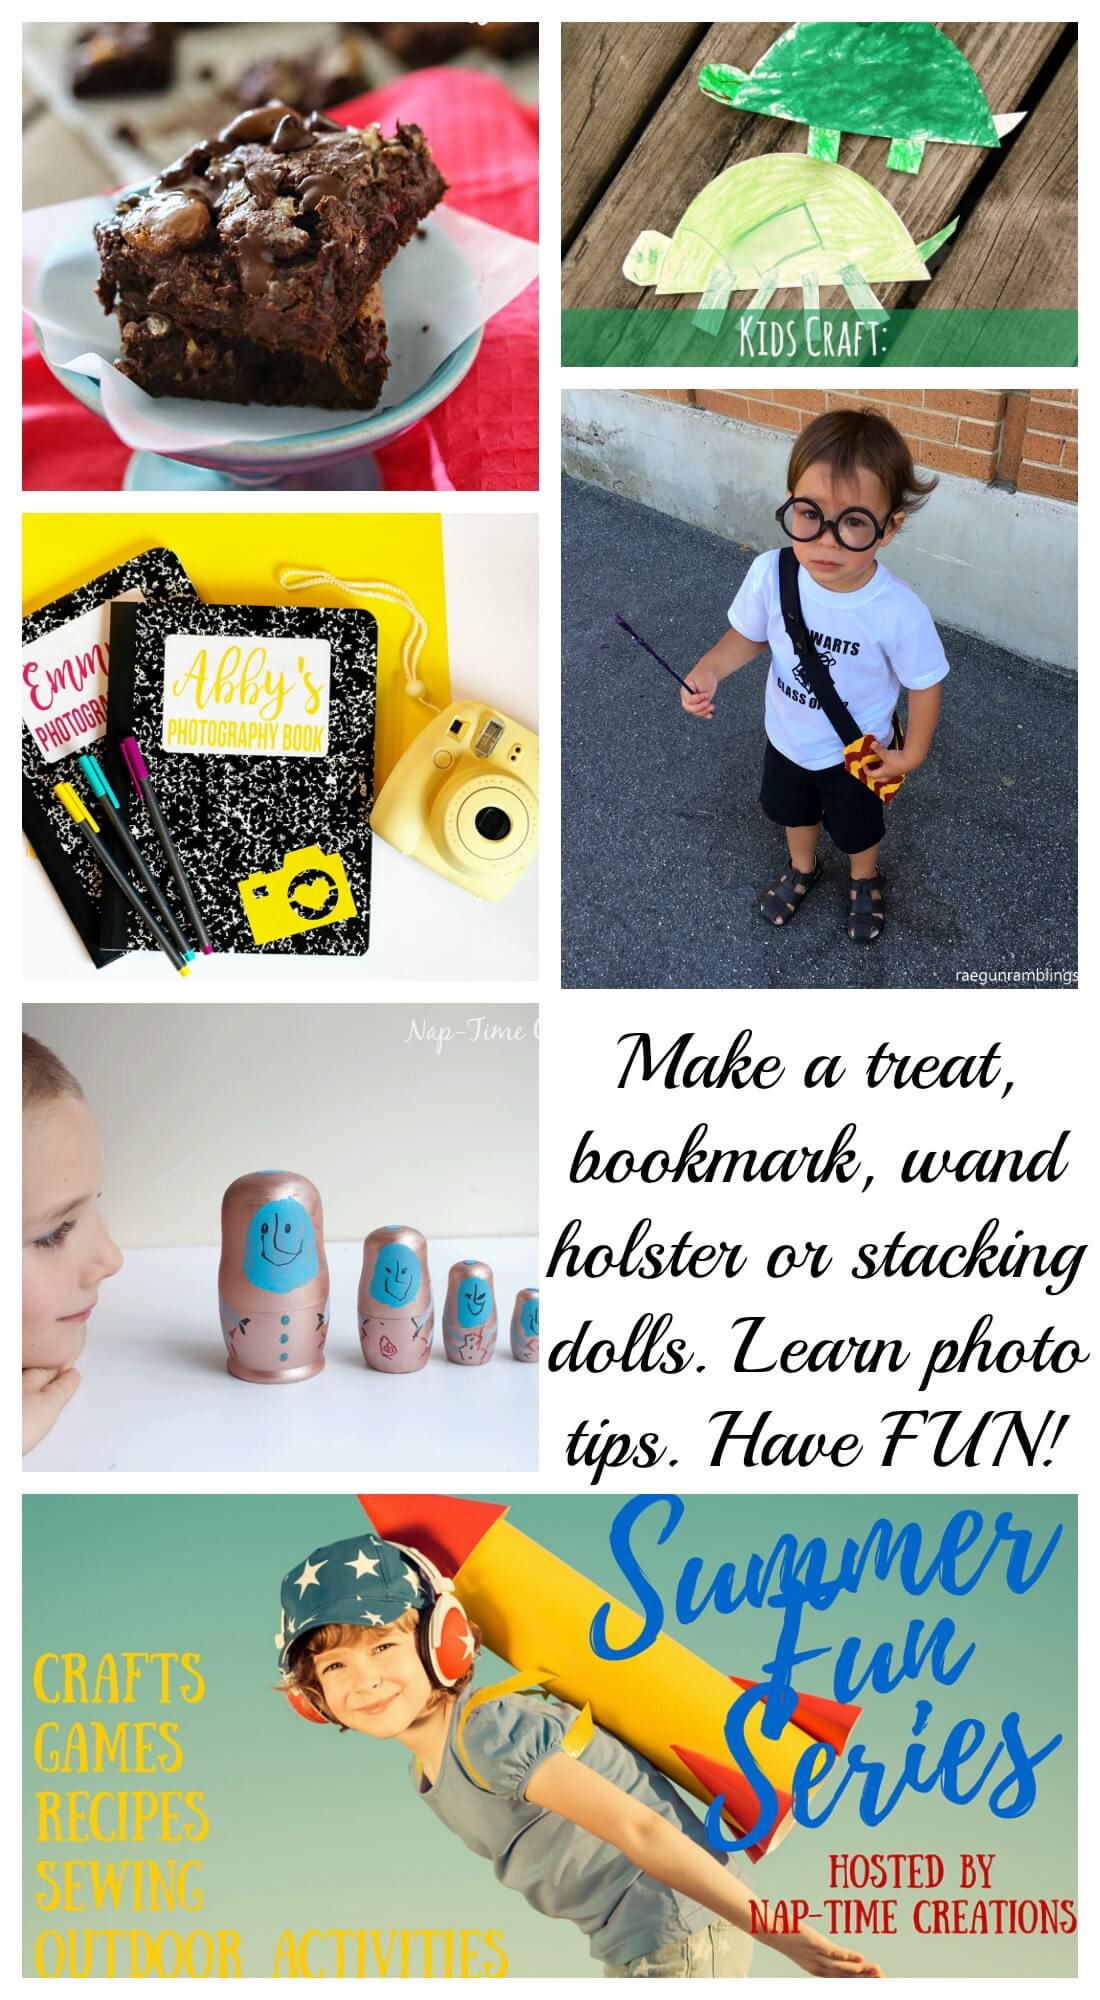 Summer Fun #6 Make a treat, bookmark, wand holster or stacking dolls. Learn kids photography tips all on Nap-Time Creations